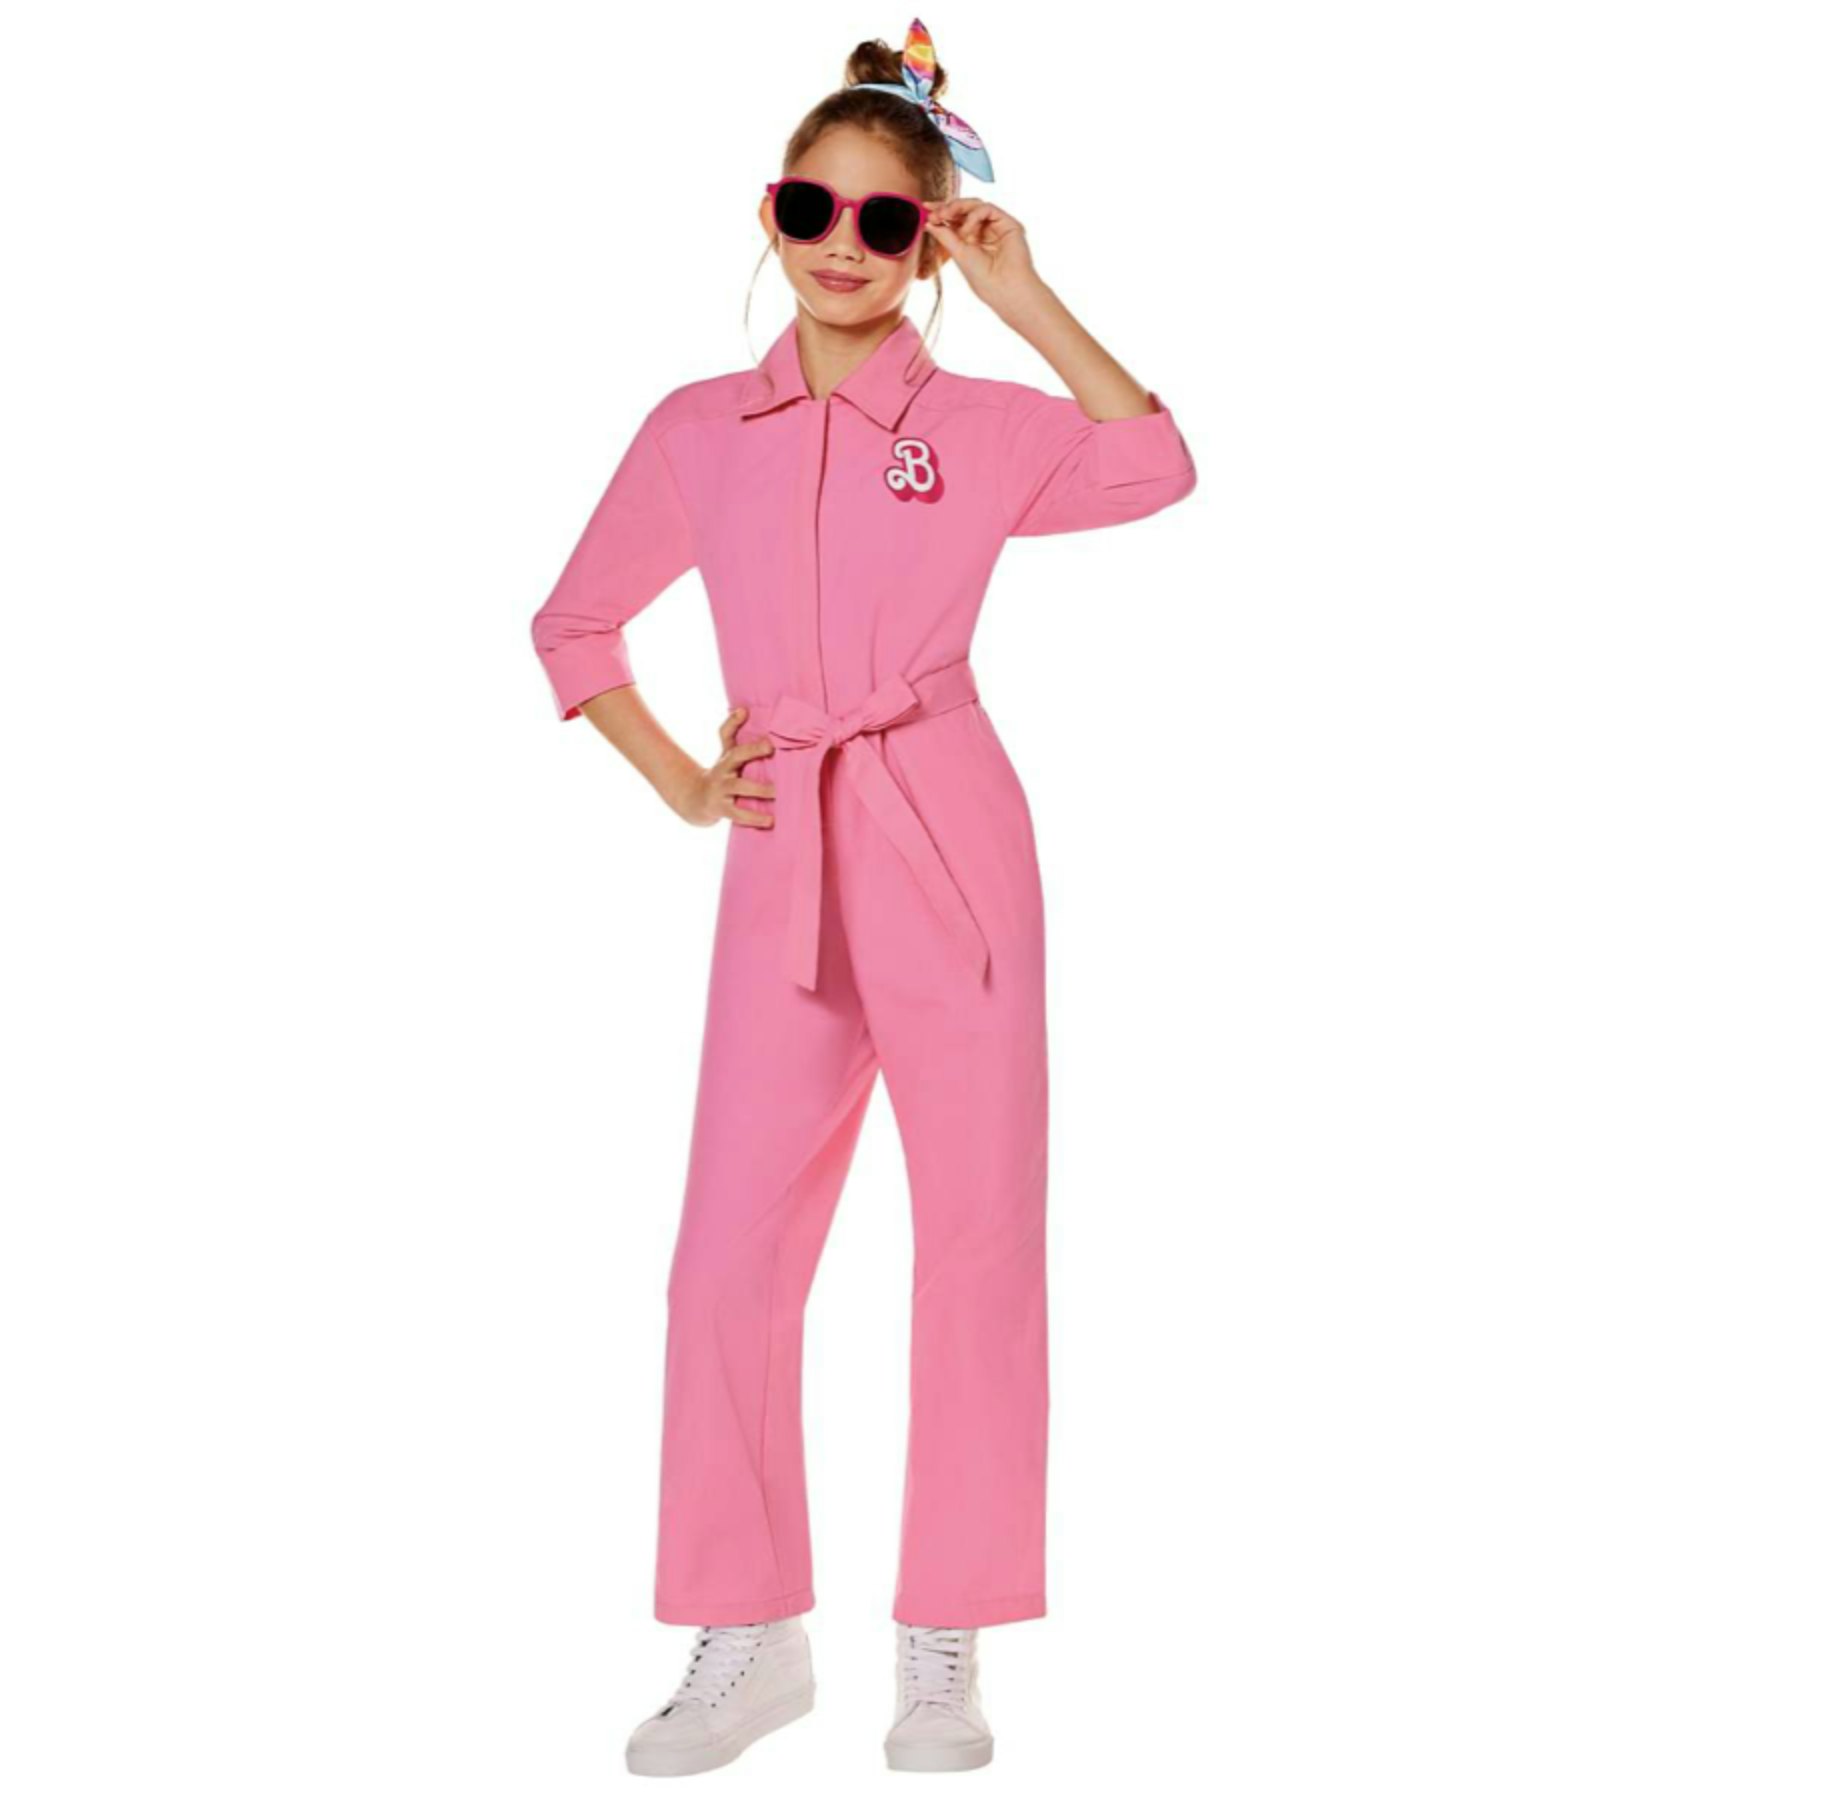 Adorable Halloween Costumes from Gymboree! » The Denver Housewife